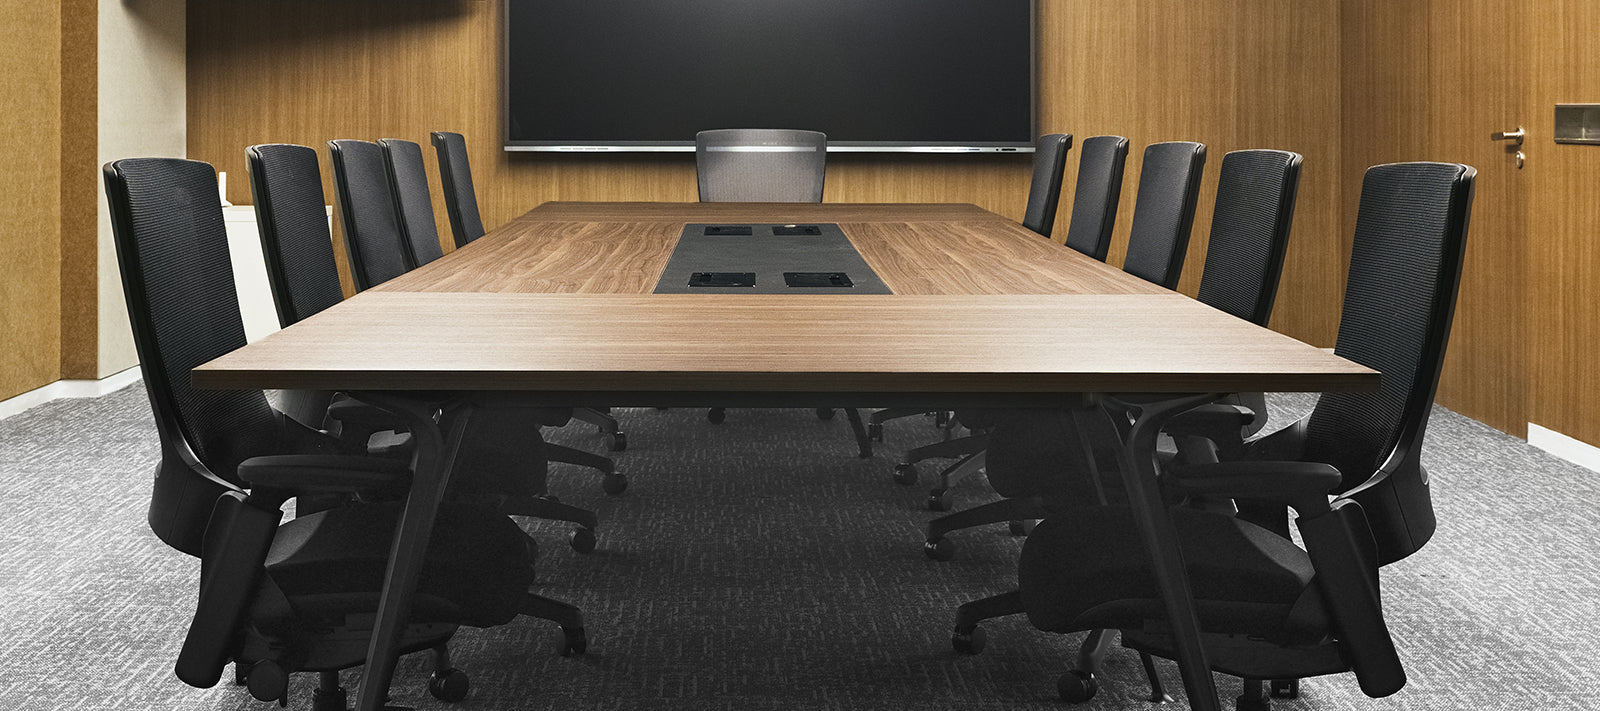 Elegant boardroom with Flujo office chairs around a large wooden table, illustrating a professional and stylish meeting environment.